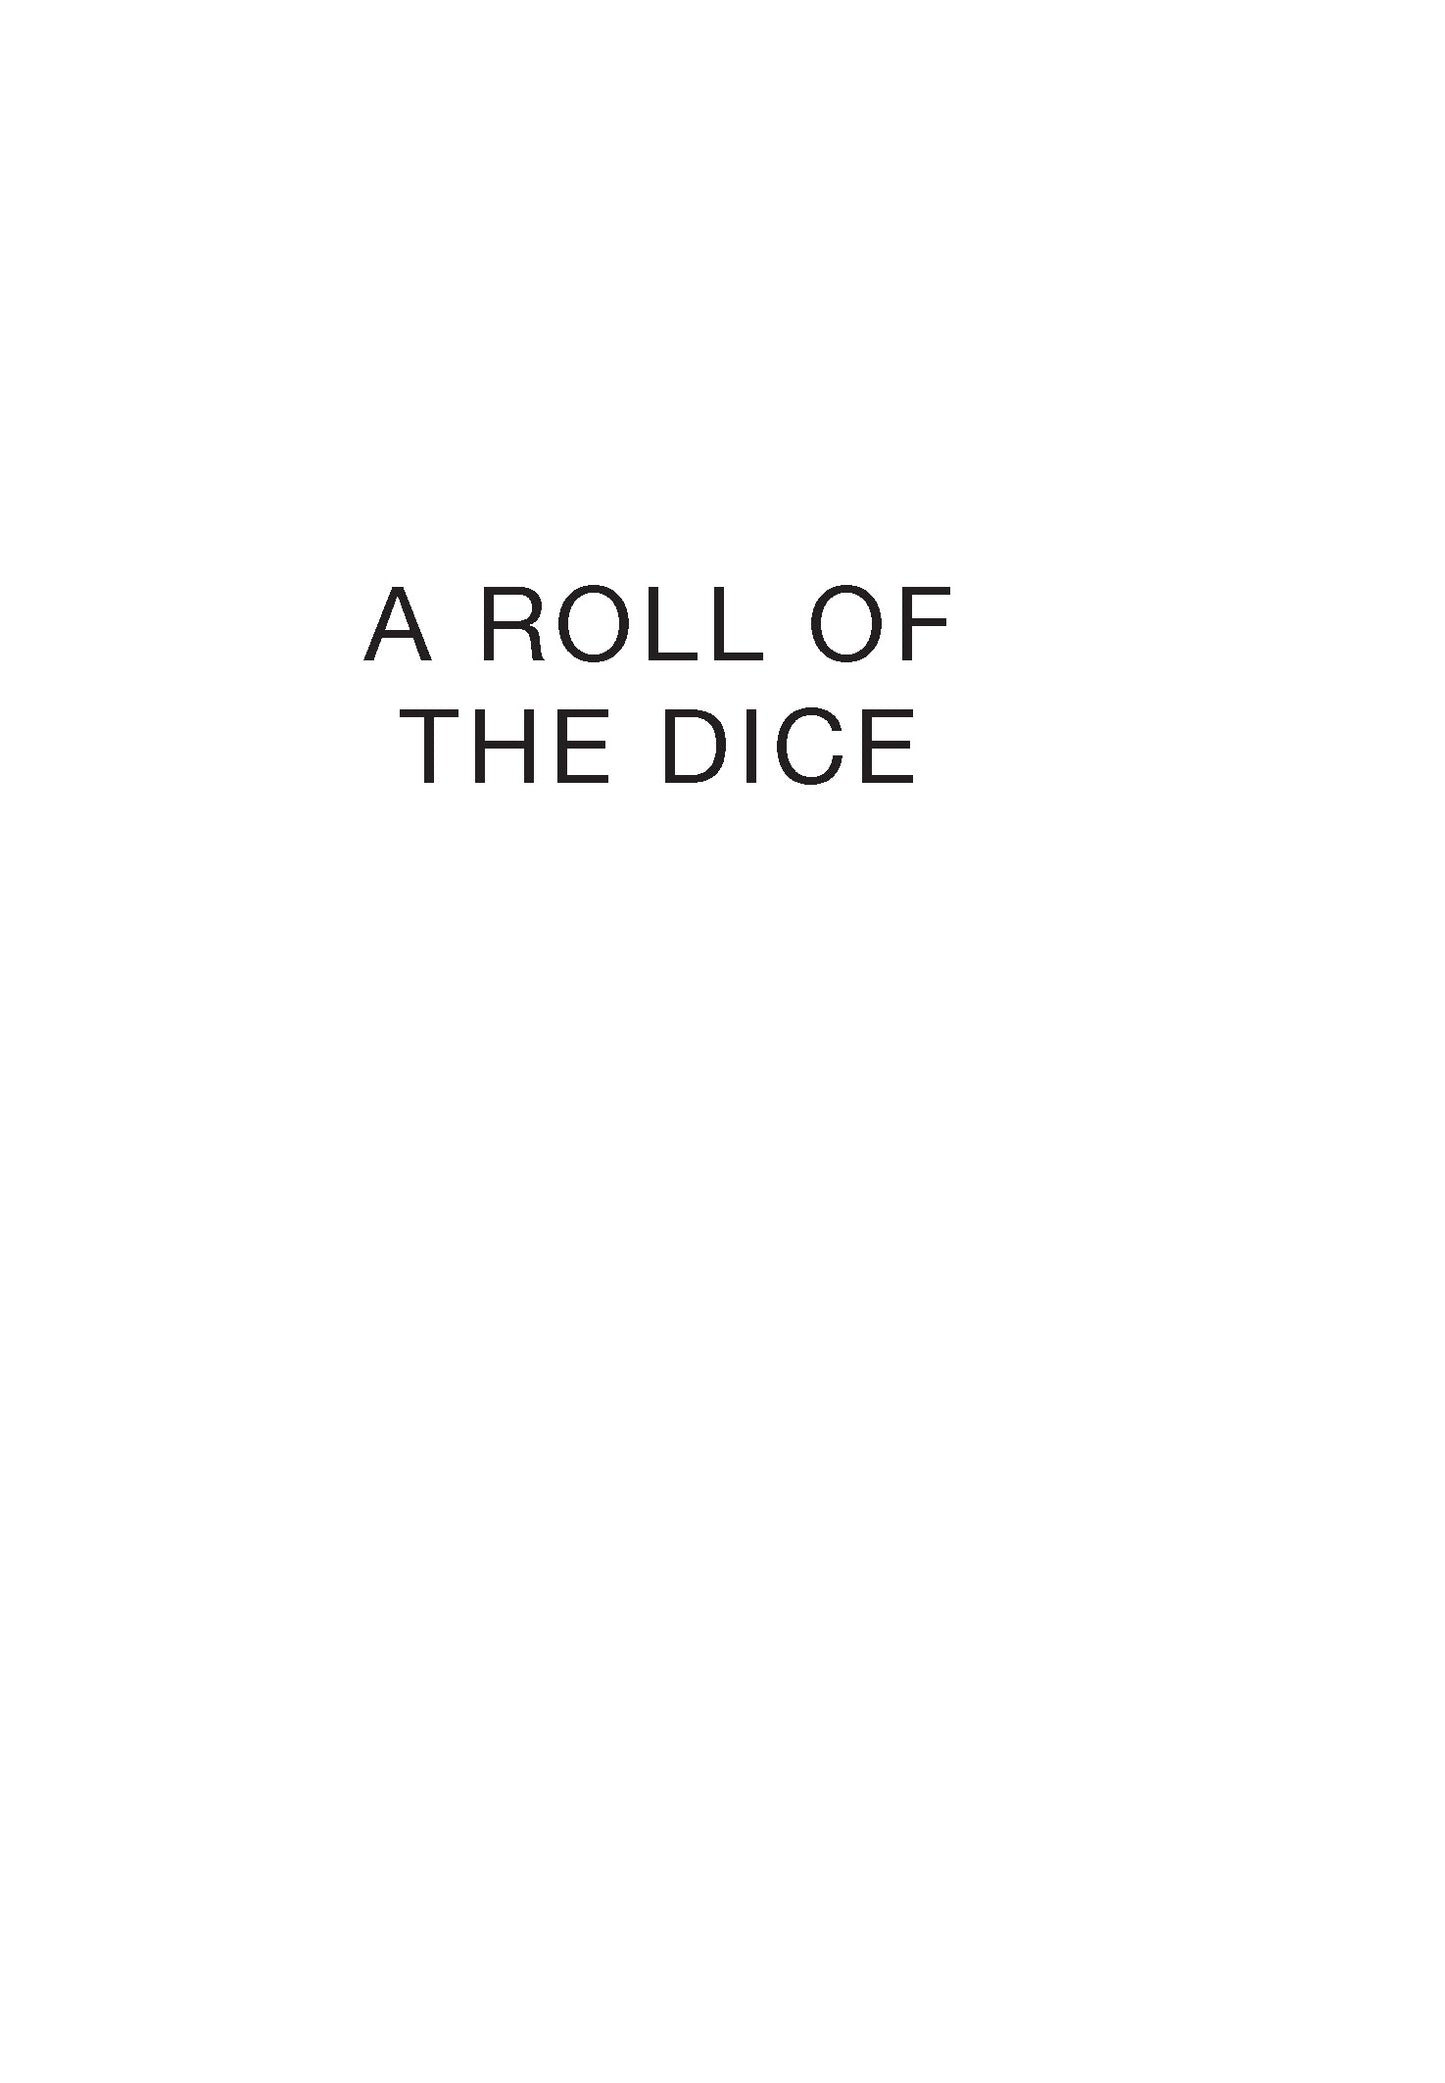 A Roll of the Dice